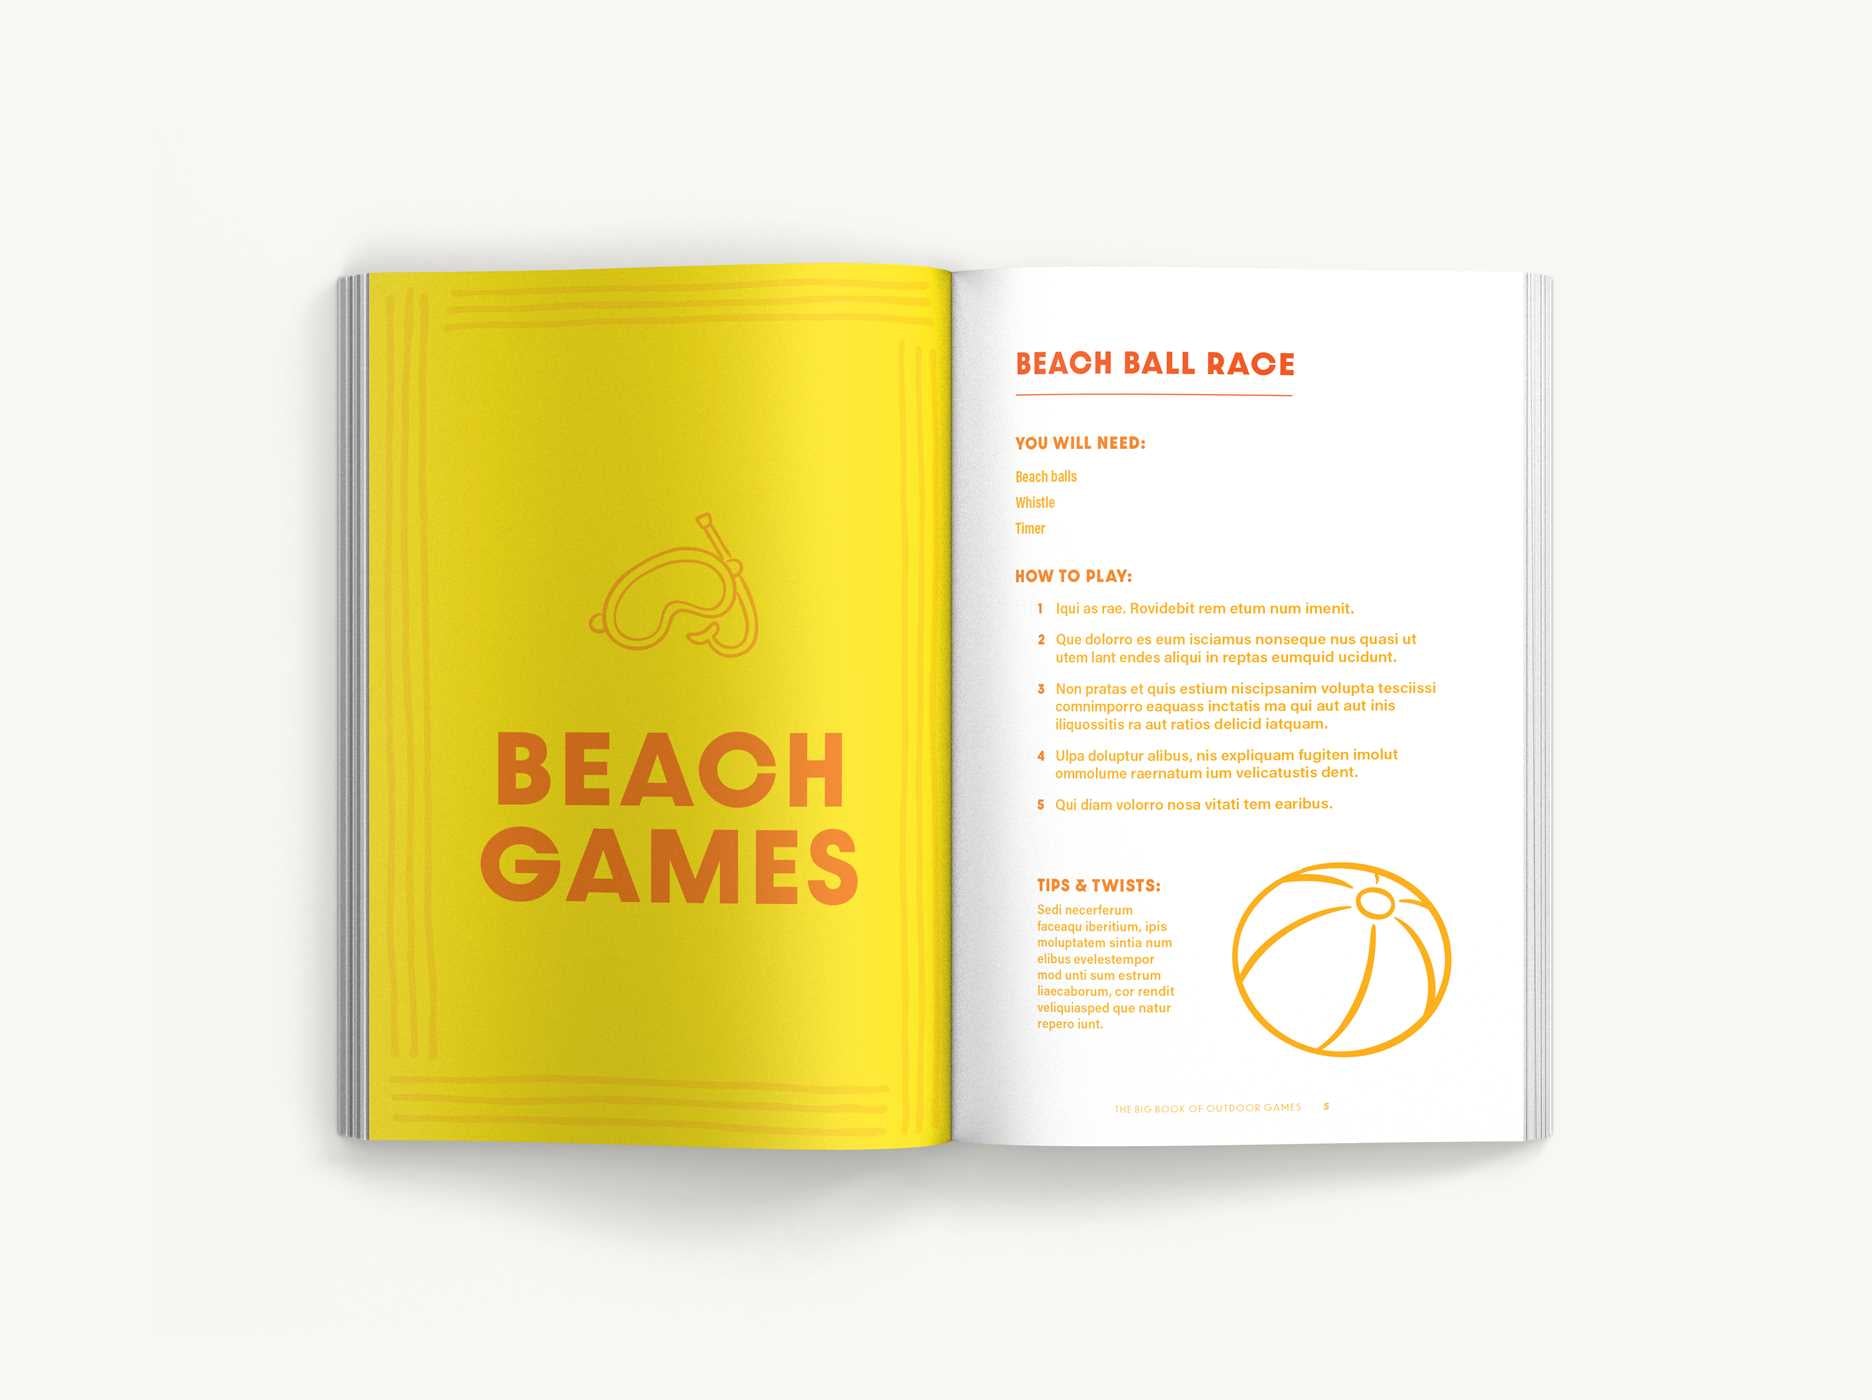 The Book of Outdoor Games: 50+ Antiboredom, Unplugged Activities